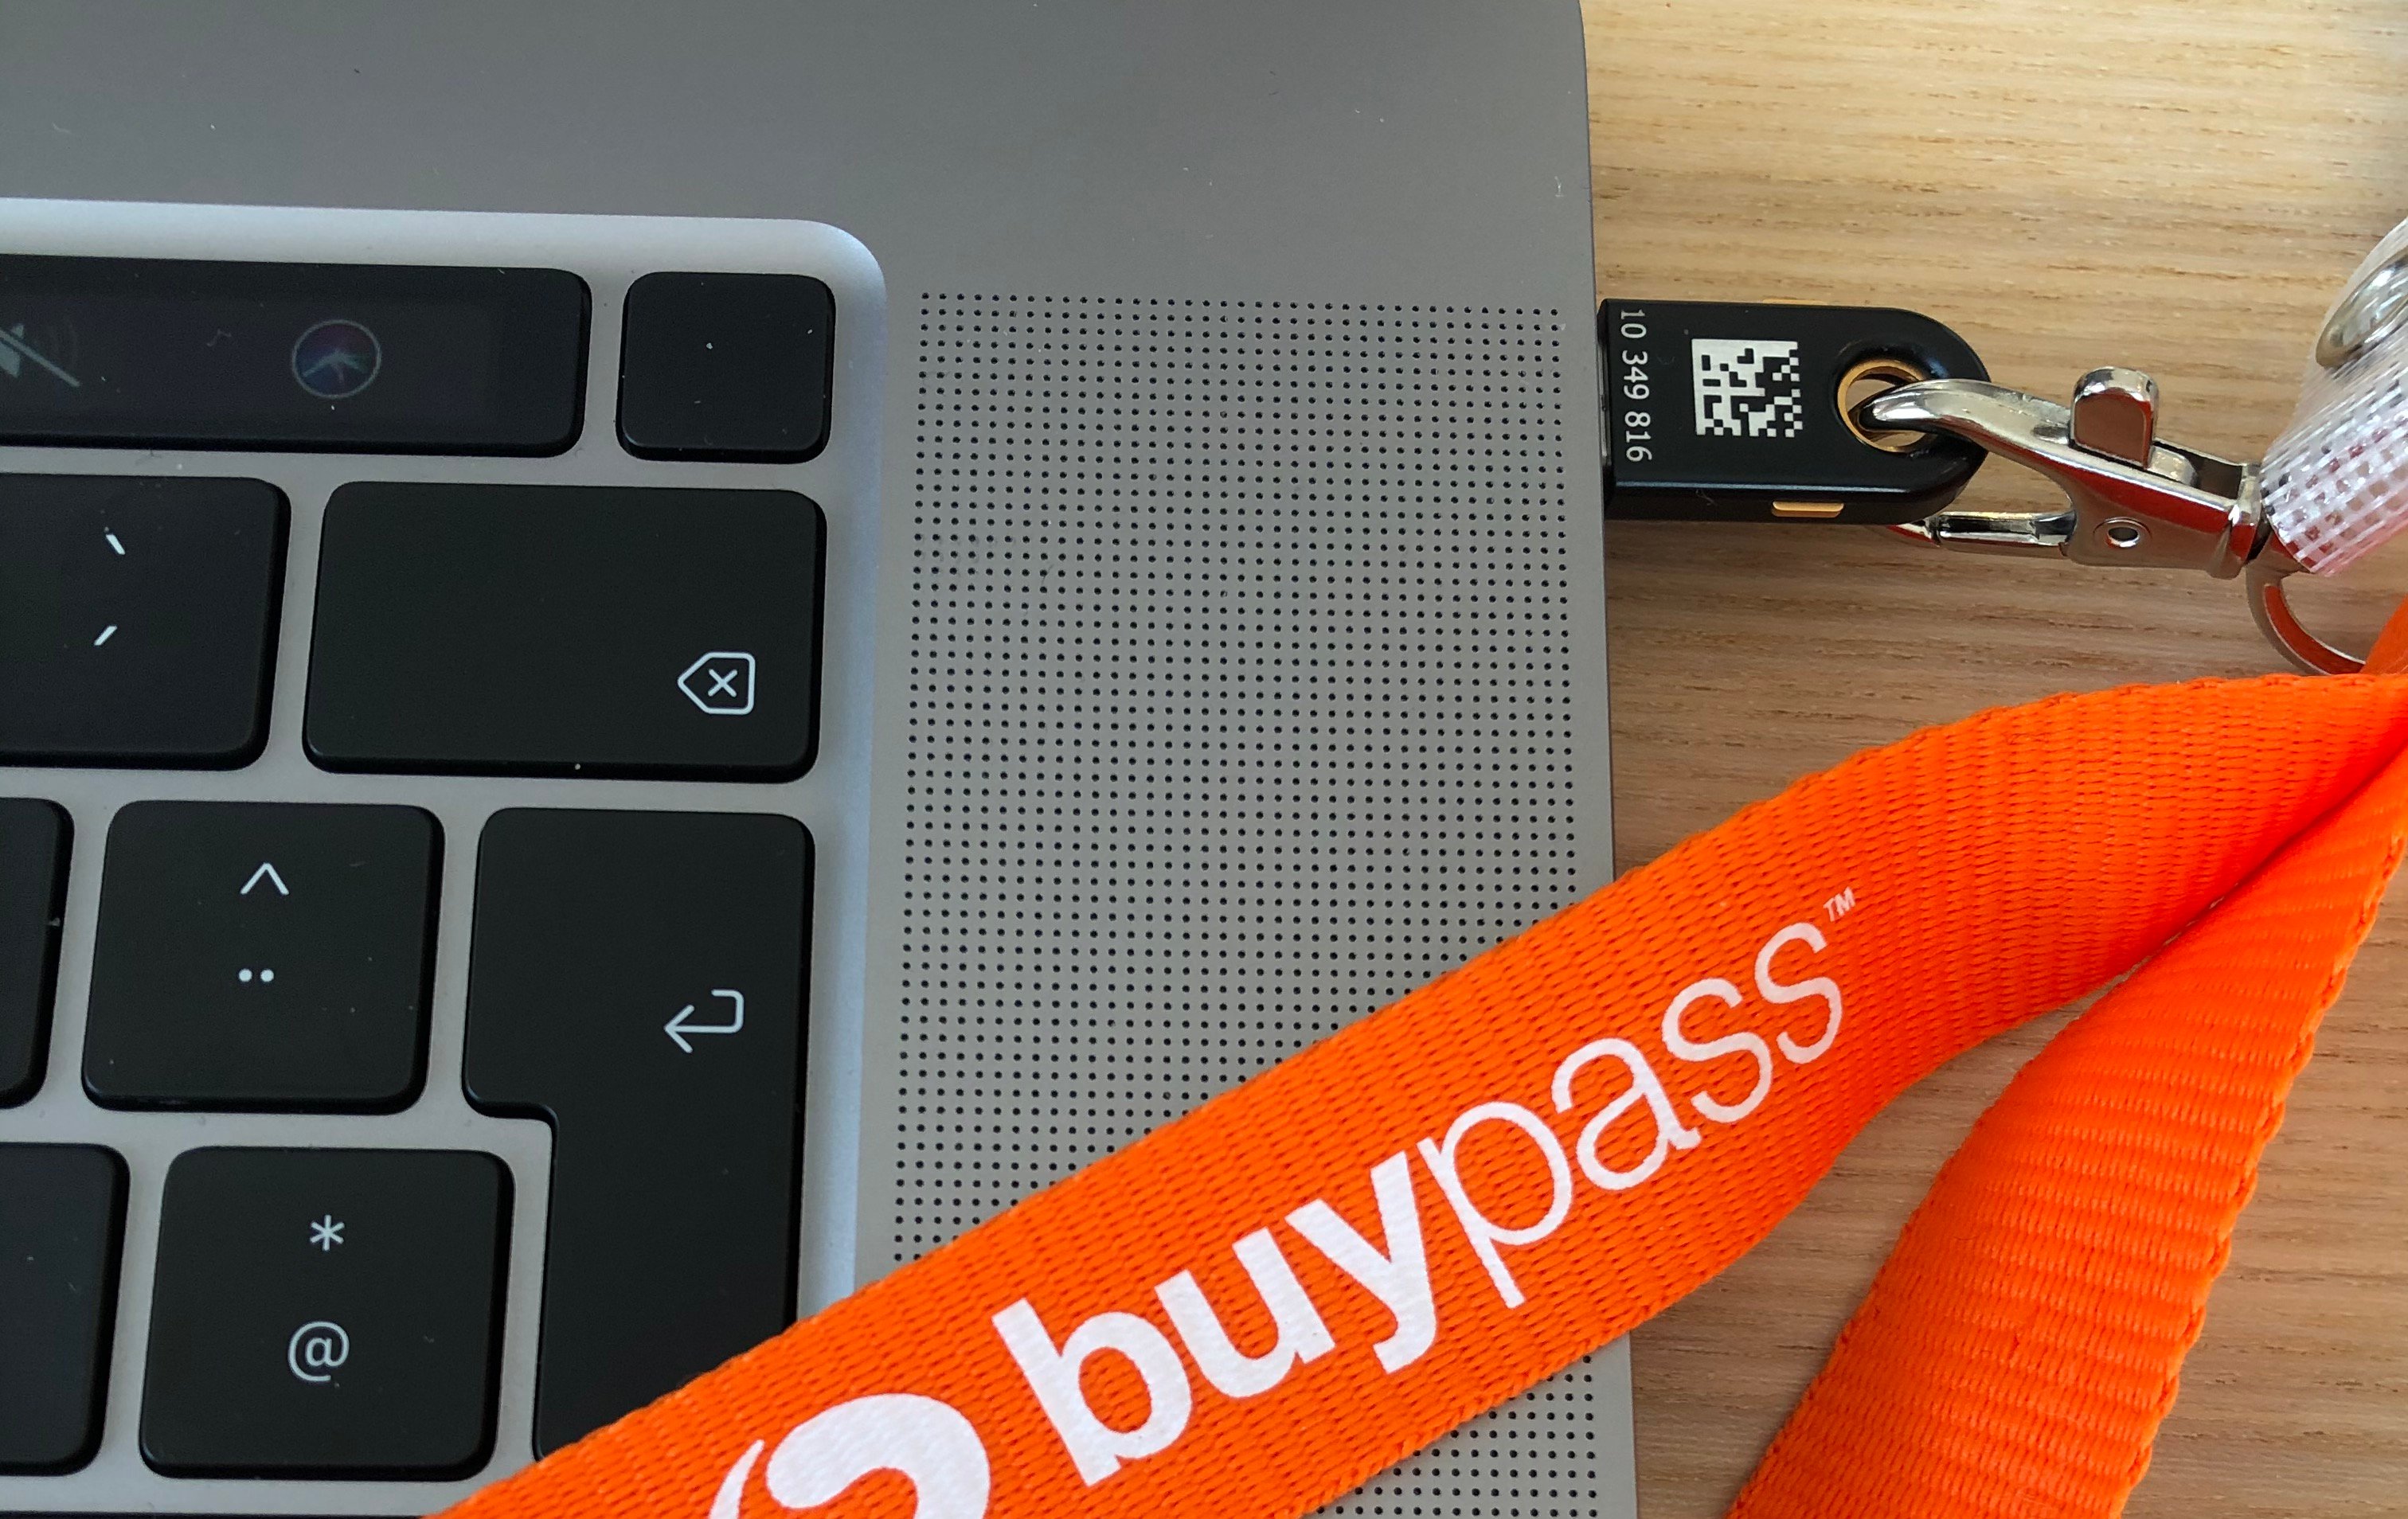 Fido2 and trust at eIDAS level from Buypass